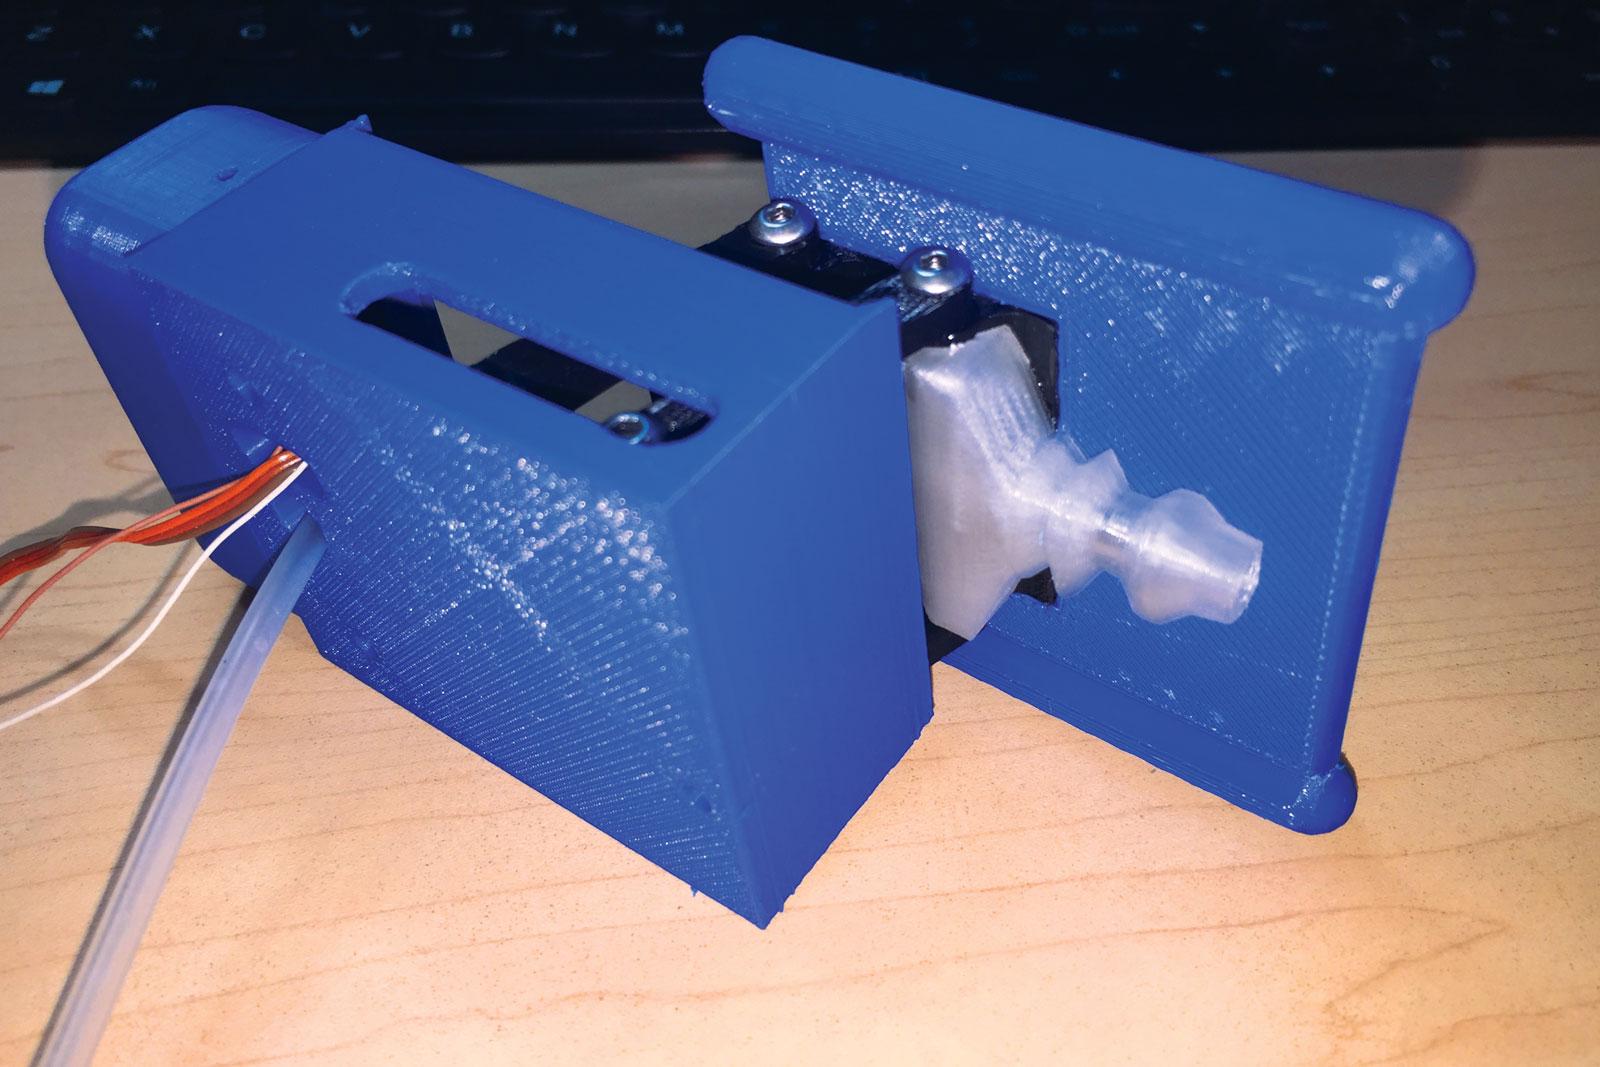 3D Printed retractable water cannons